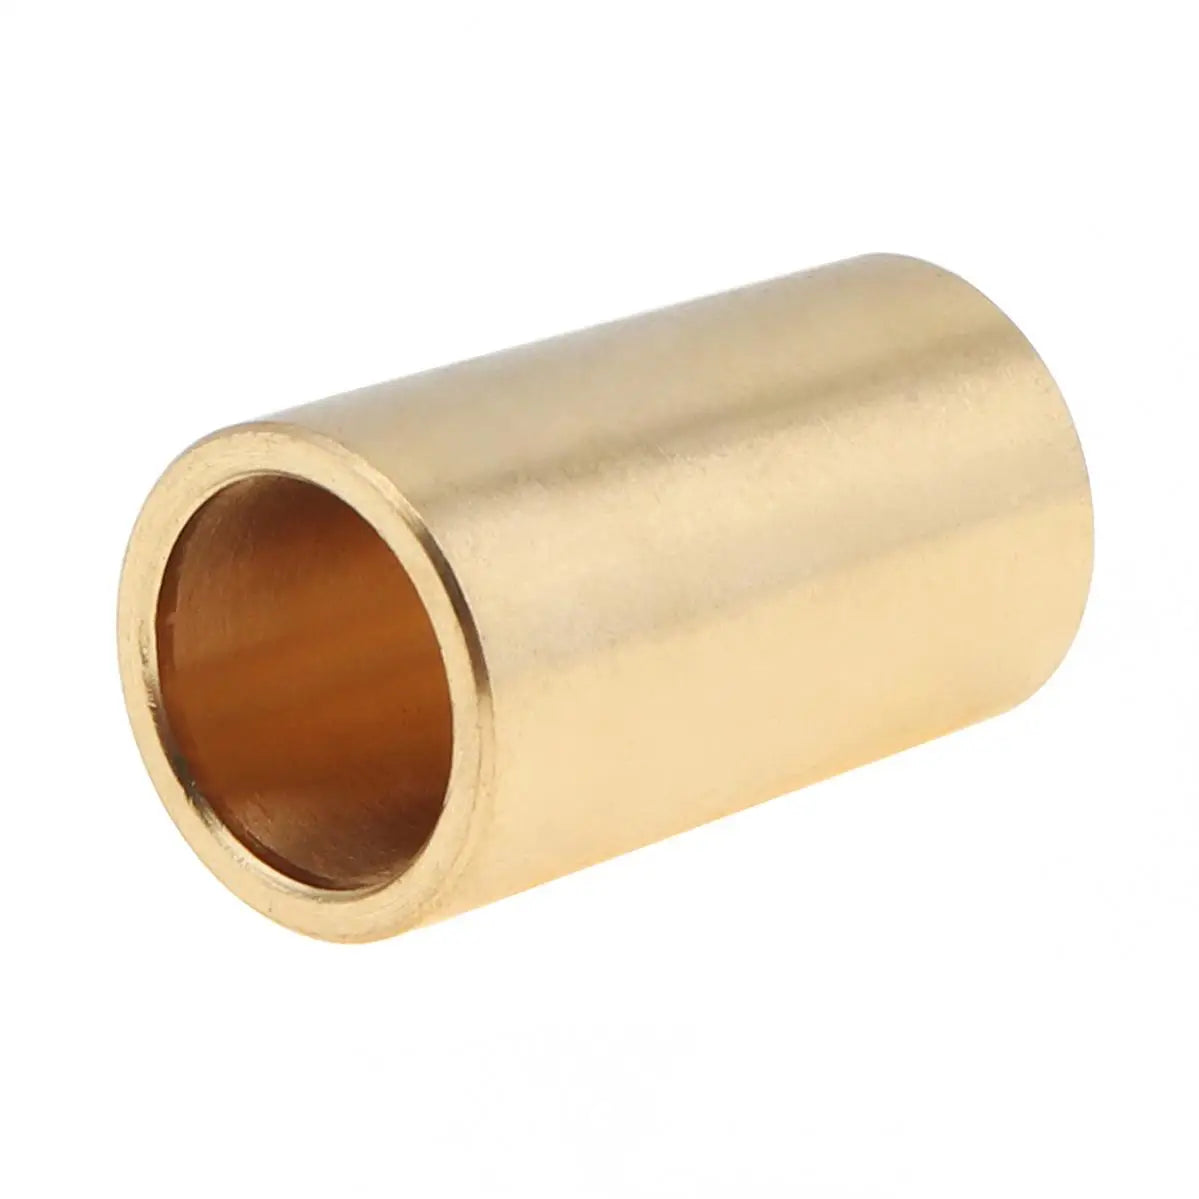 B10 Drill Chuck Connecting Rod Sleeve Copper Taper Coupling